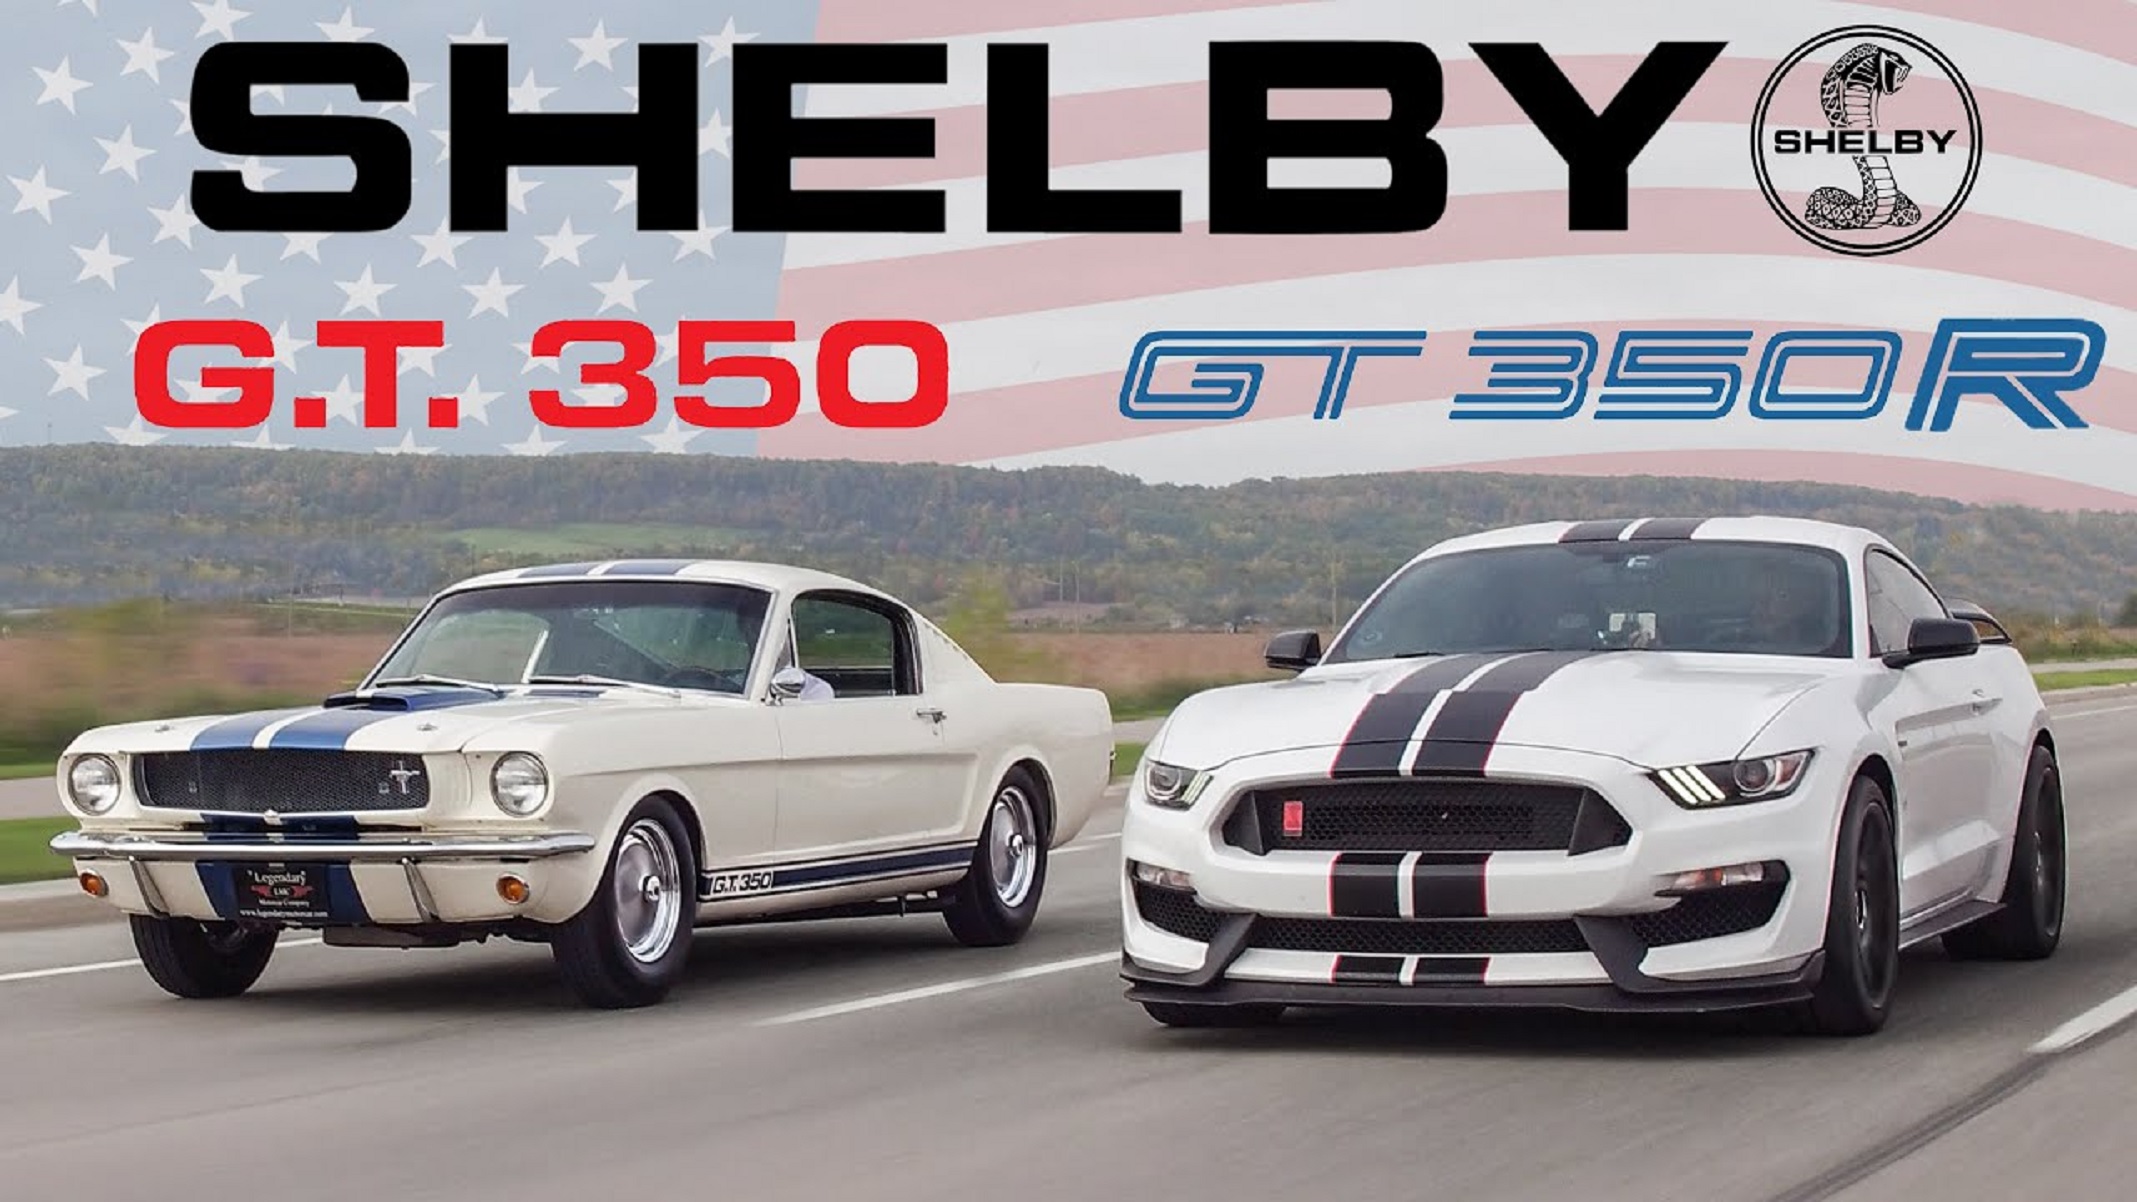 A white-with-blue-stripes 1965 Ford Mustang Shelby GT350 driving next to a white-with-blue-stripes 2020 Ford Mustang Shelby GT350R on the street